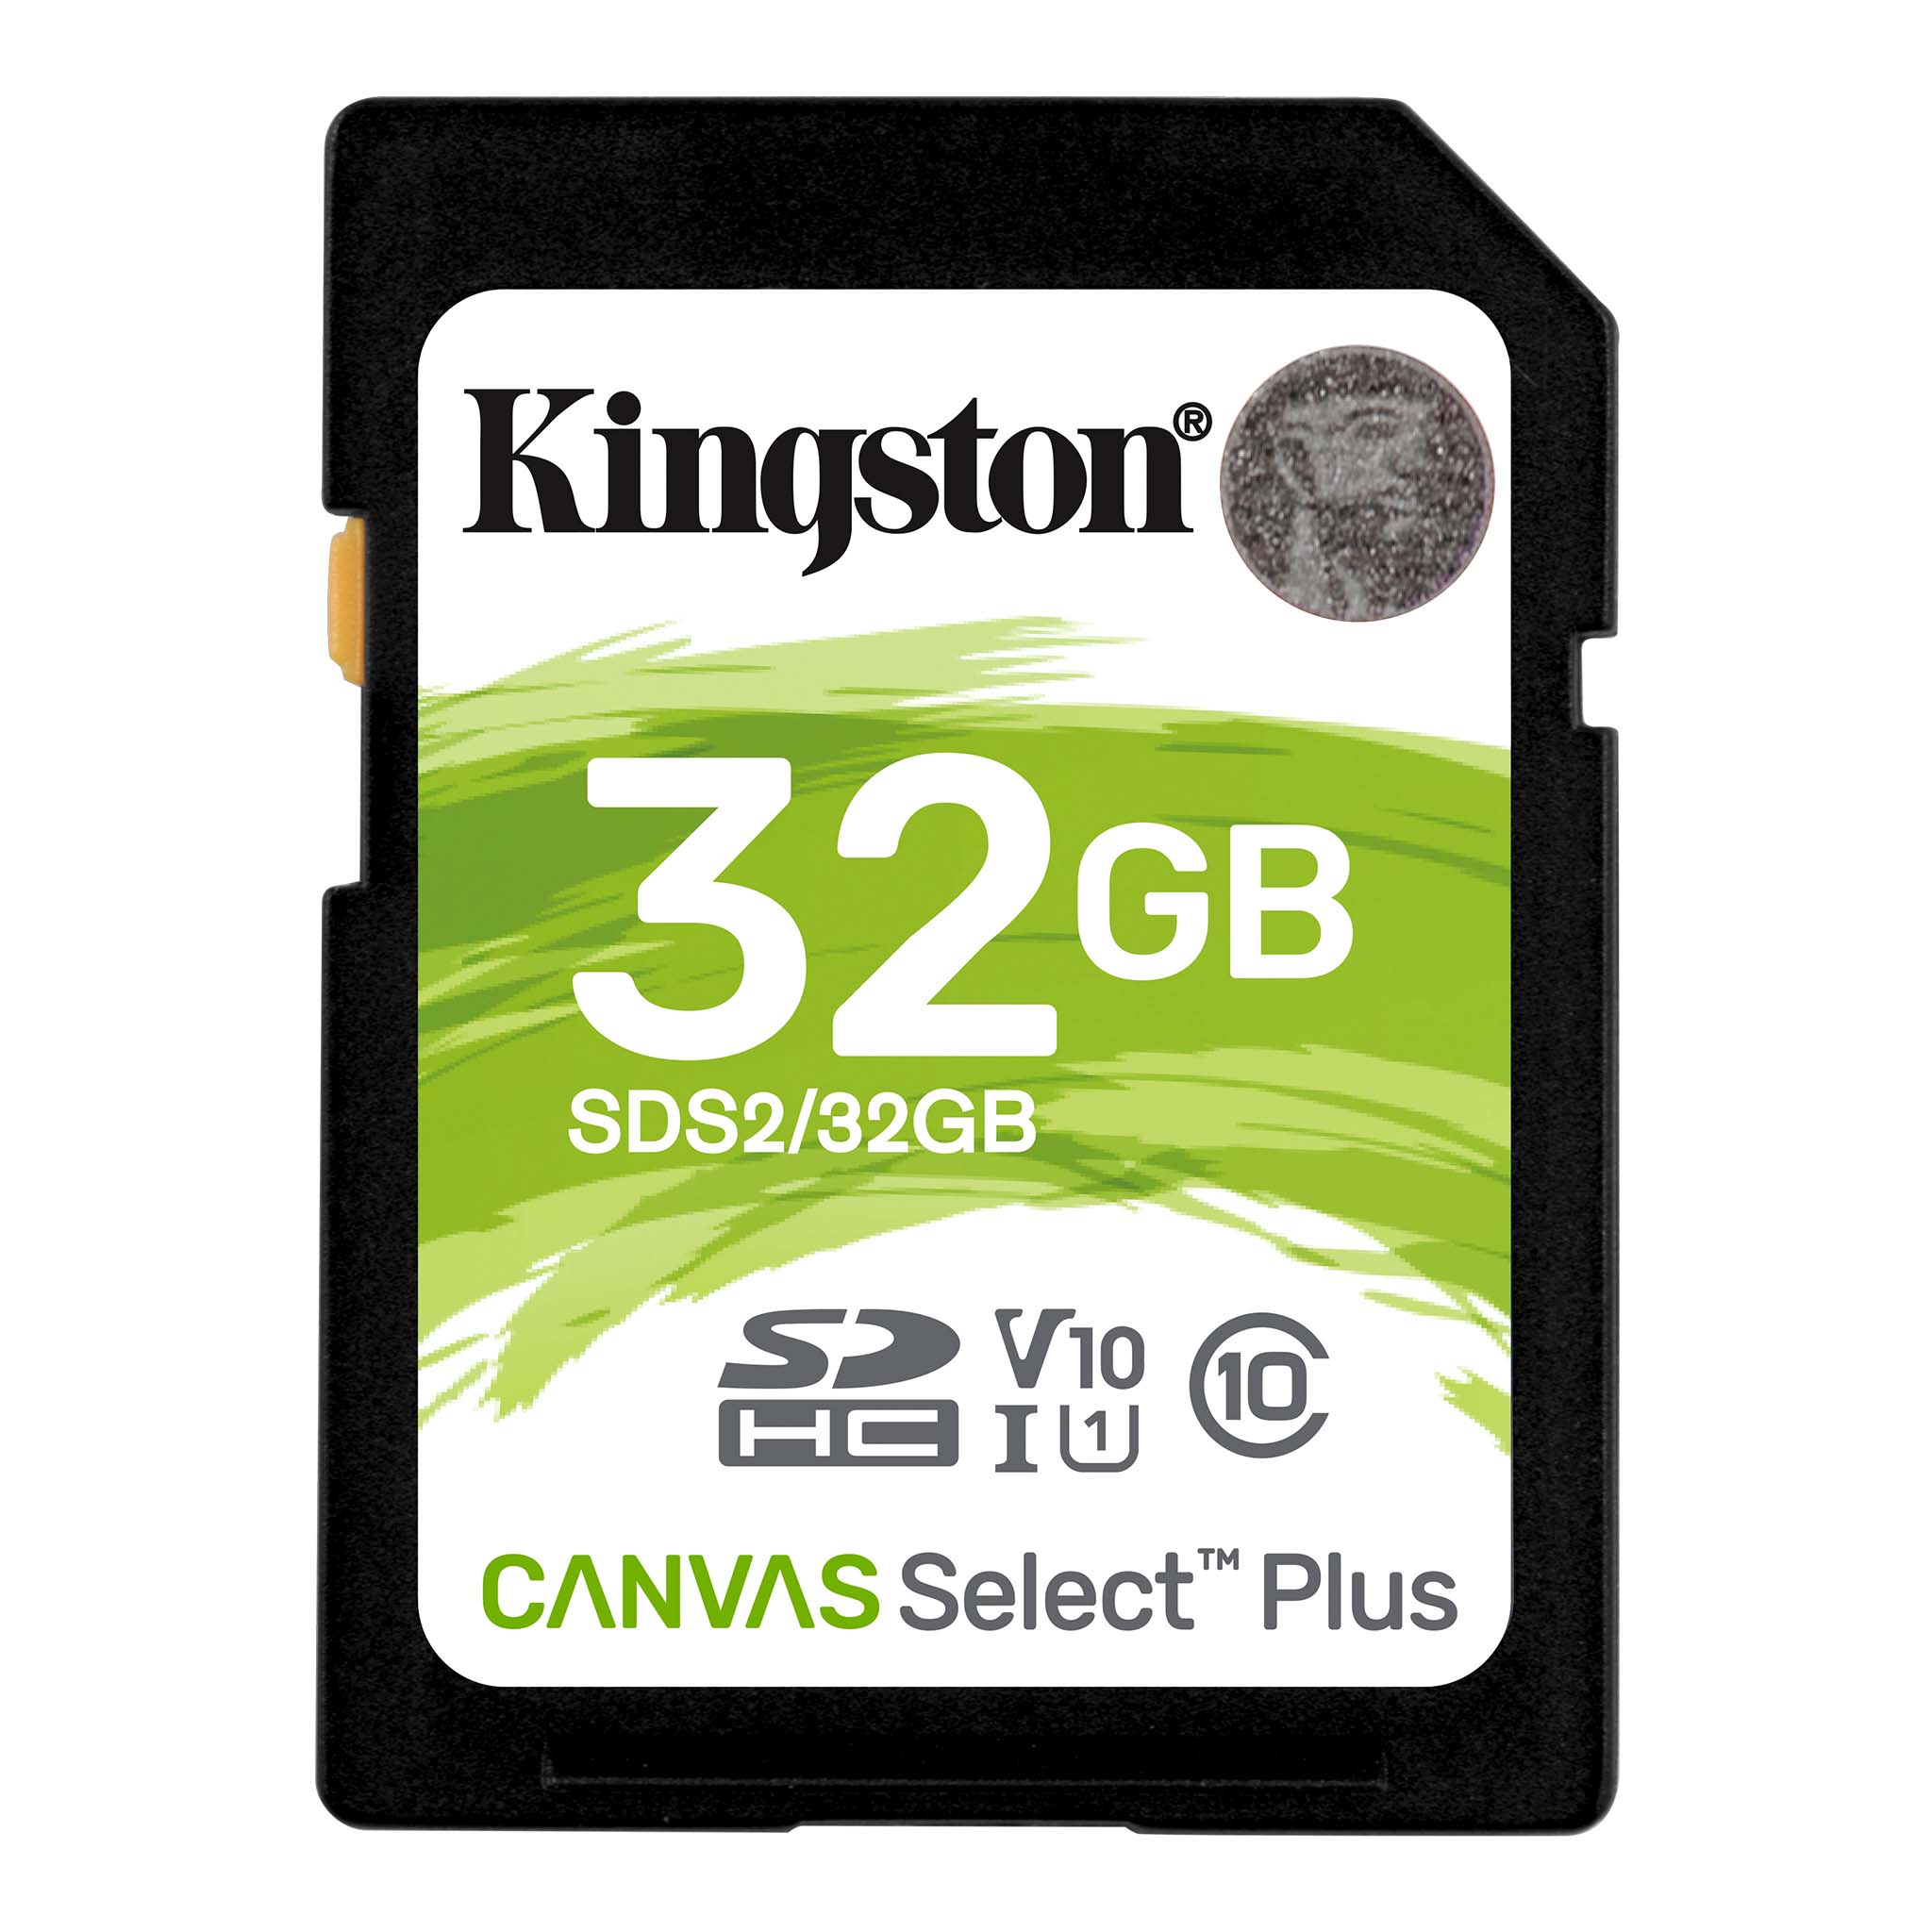 Kingston 32GB Spice Mobile Mi-430 MicroSDHC Canvas Select Plus Card Verified by SanFlash. 100MBs Works with Kingston 